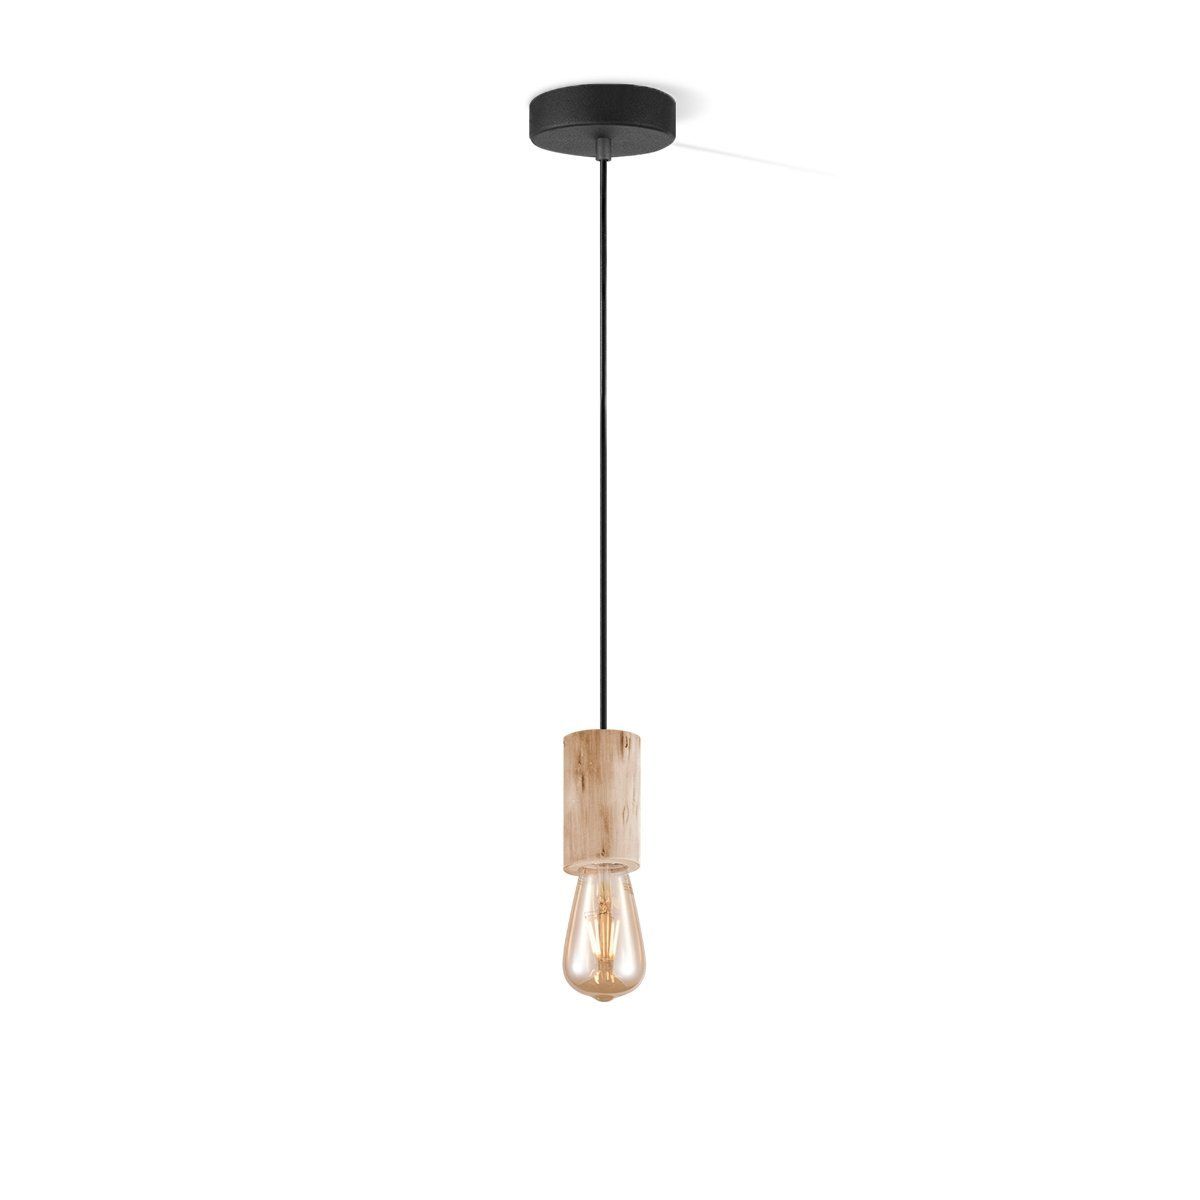 Duplicaat bron melodie Home sweet home hanglamp Billy small - houten tak